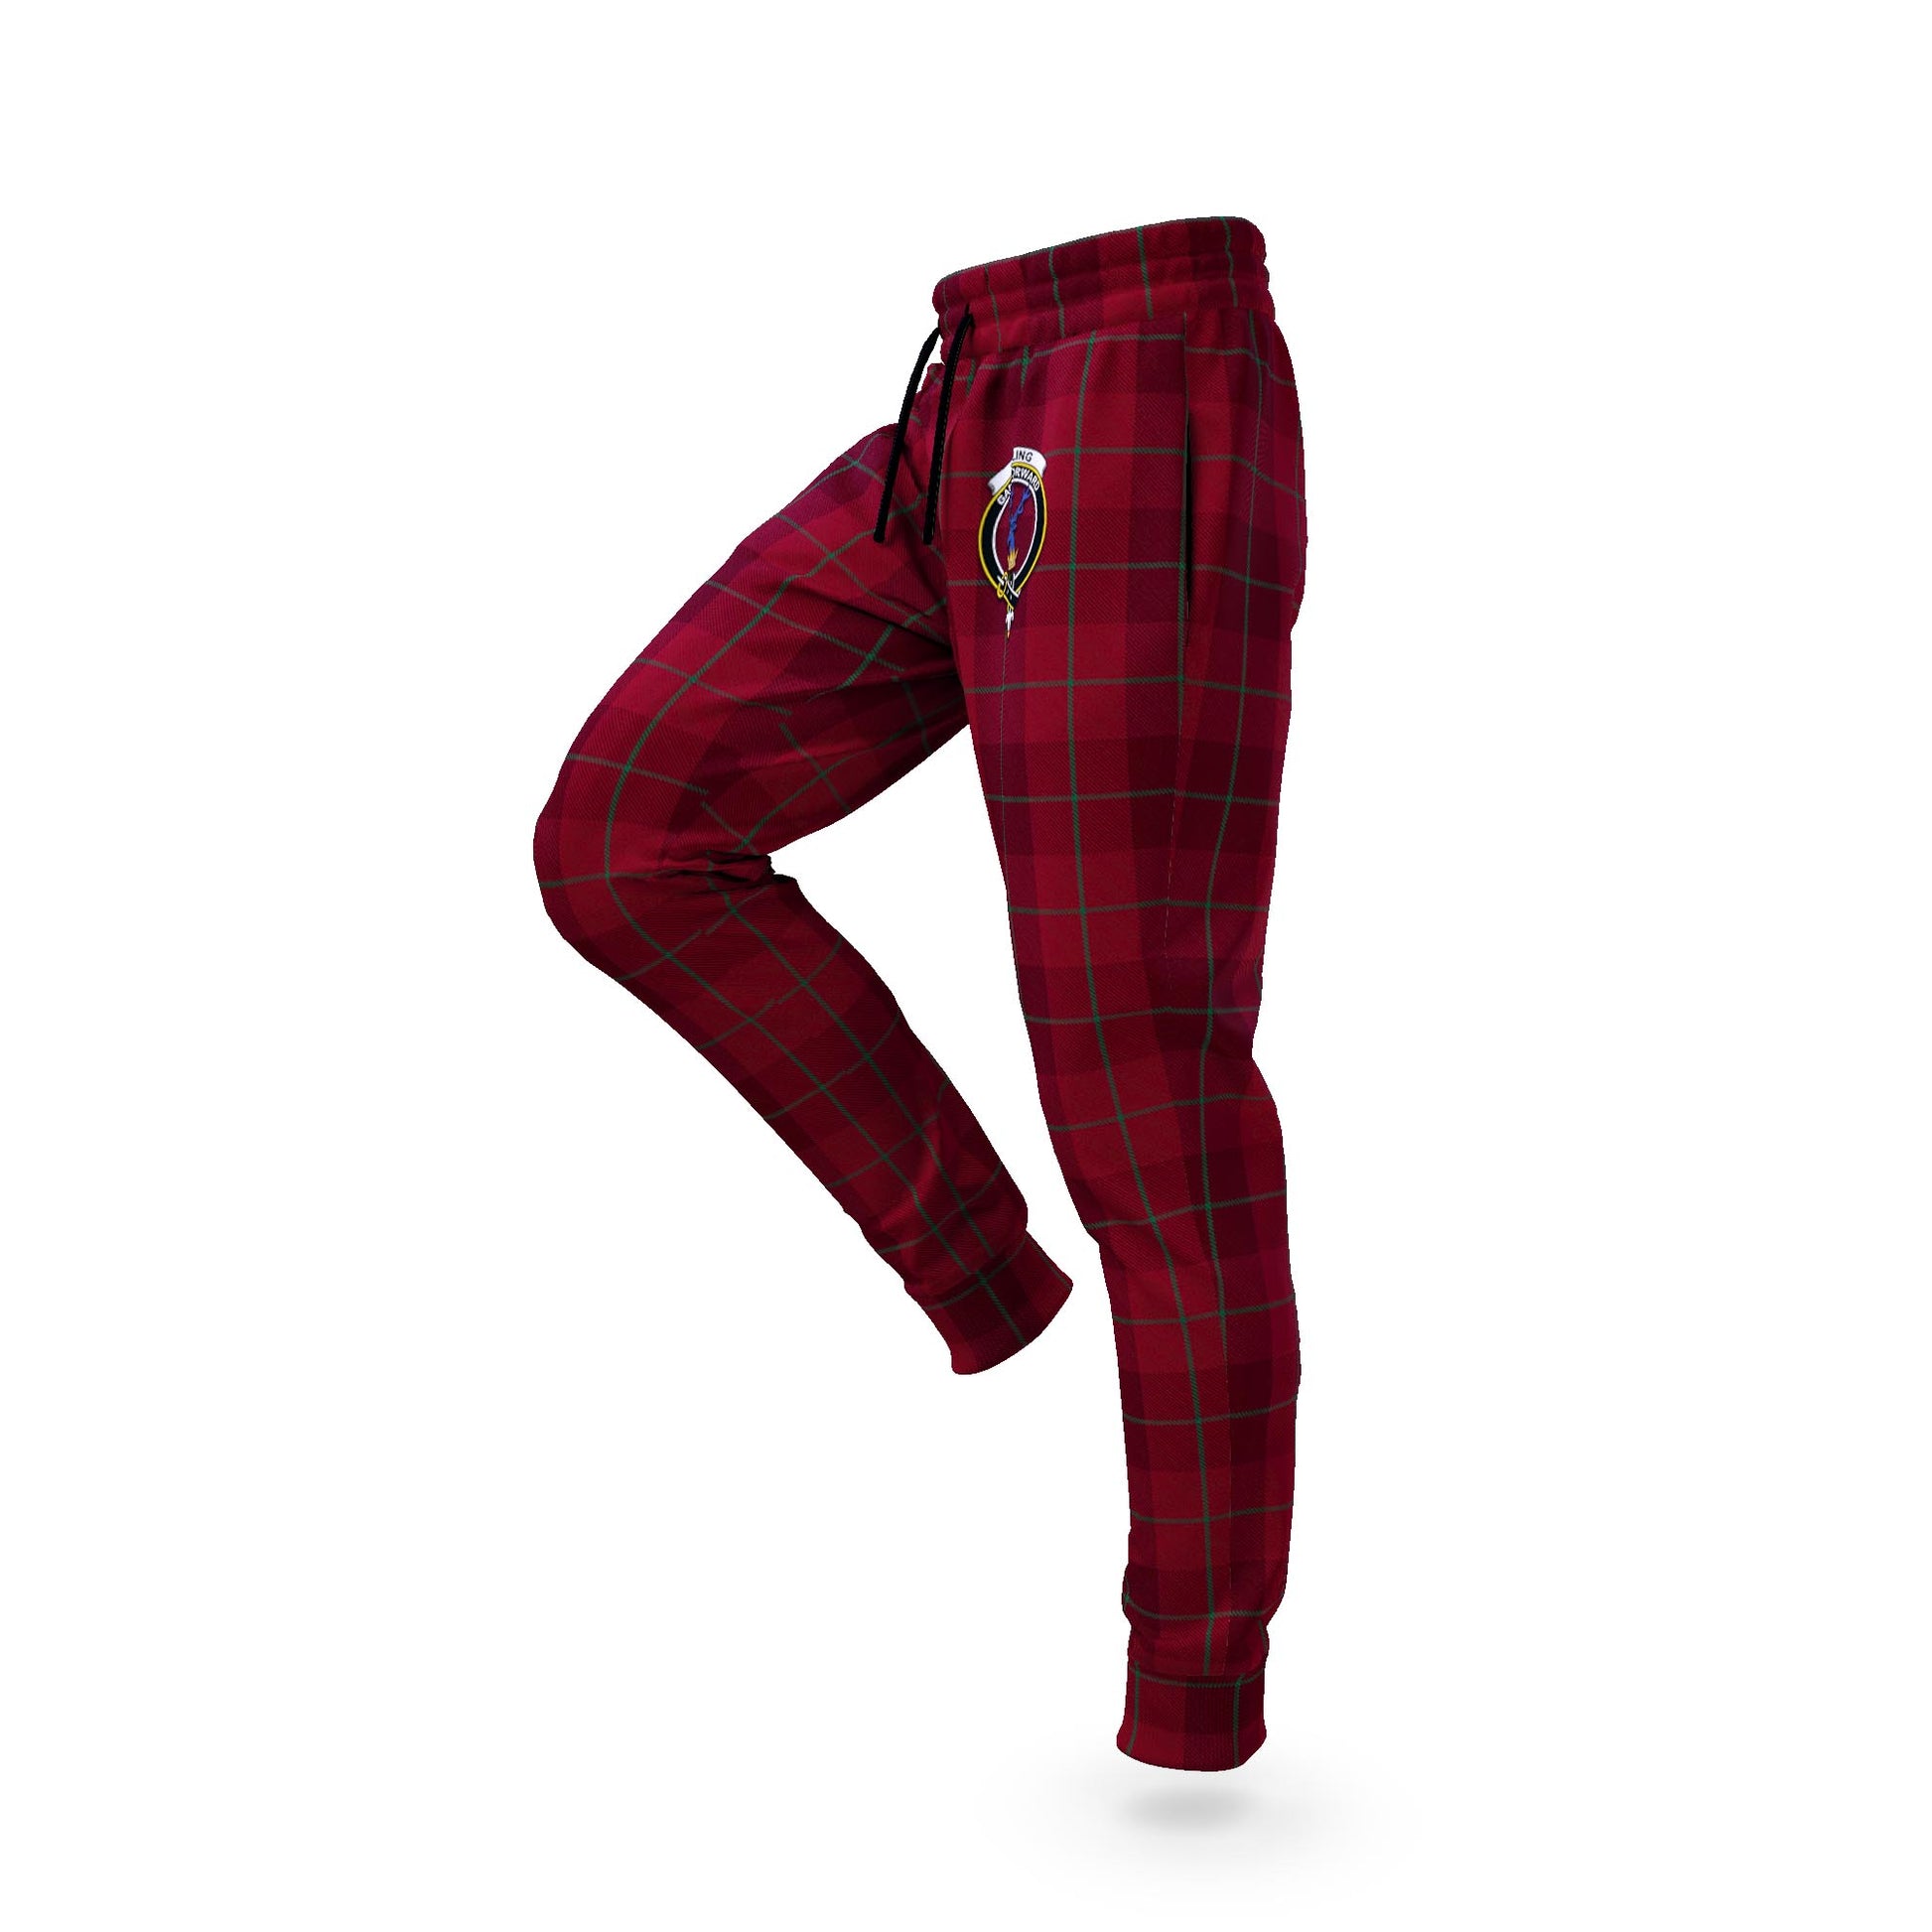 Stirling of Keir Tartan Joggers Pants with Family Crest S - Tartanvibesclothing Shop